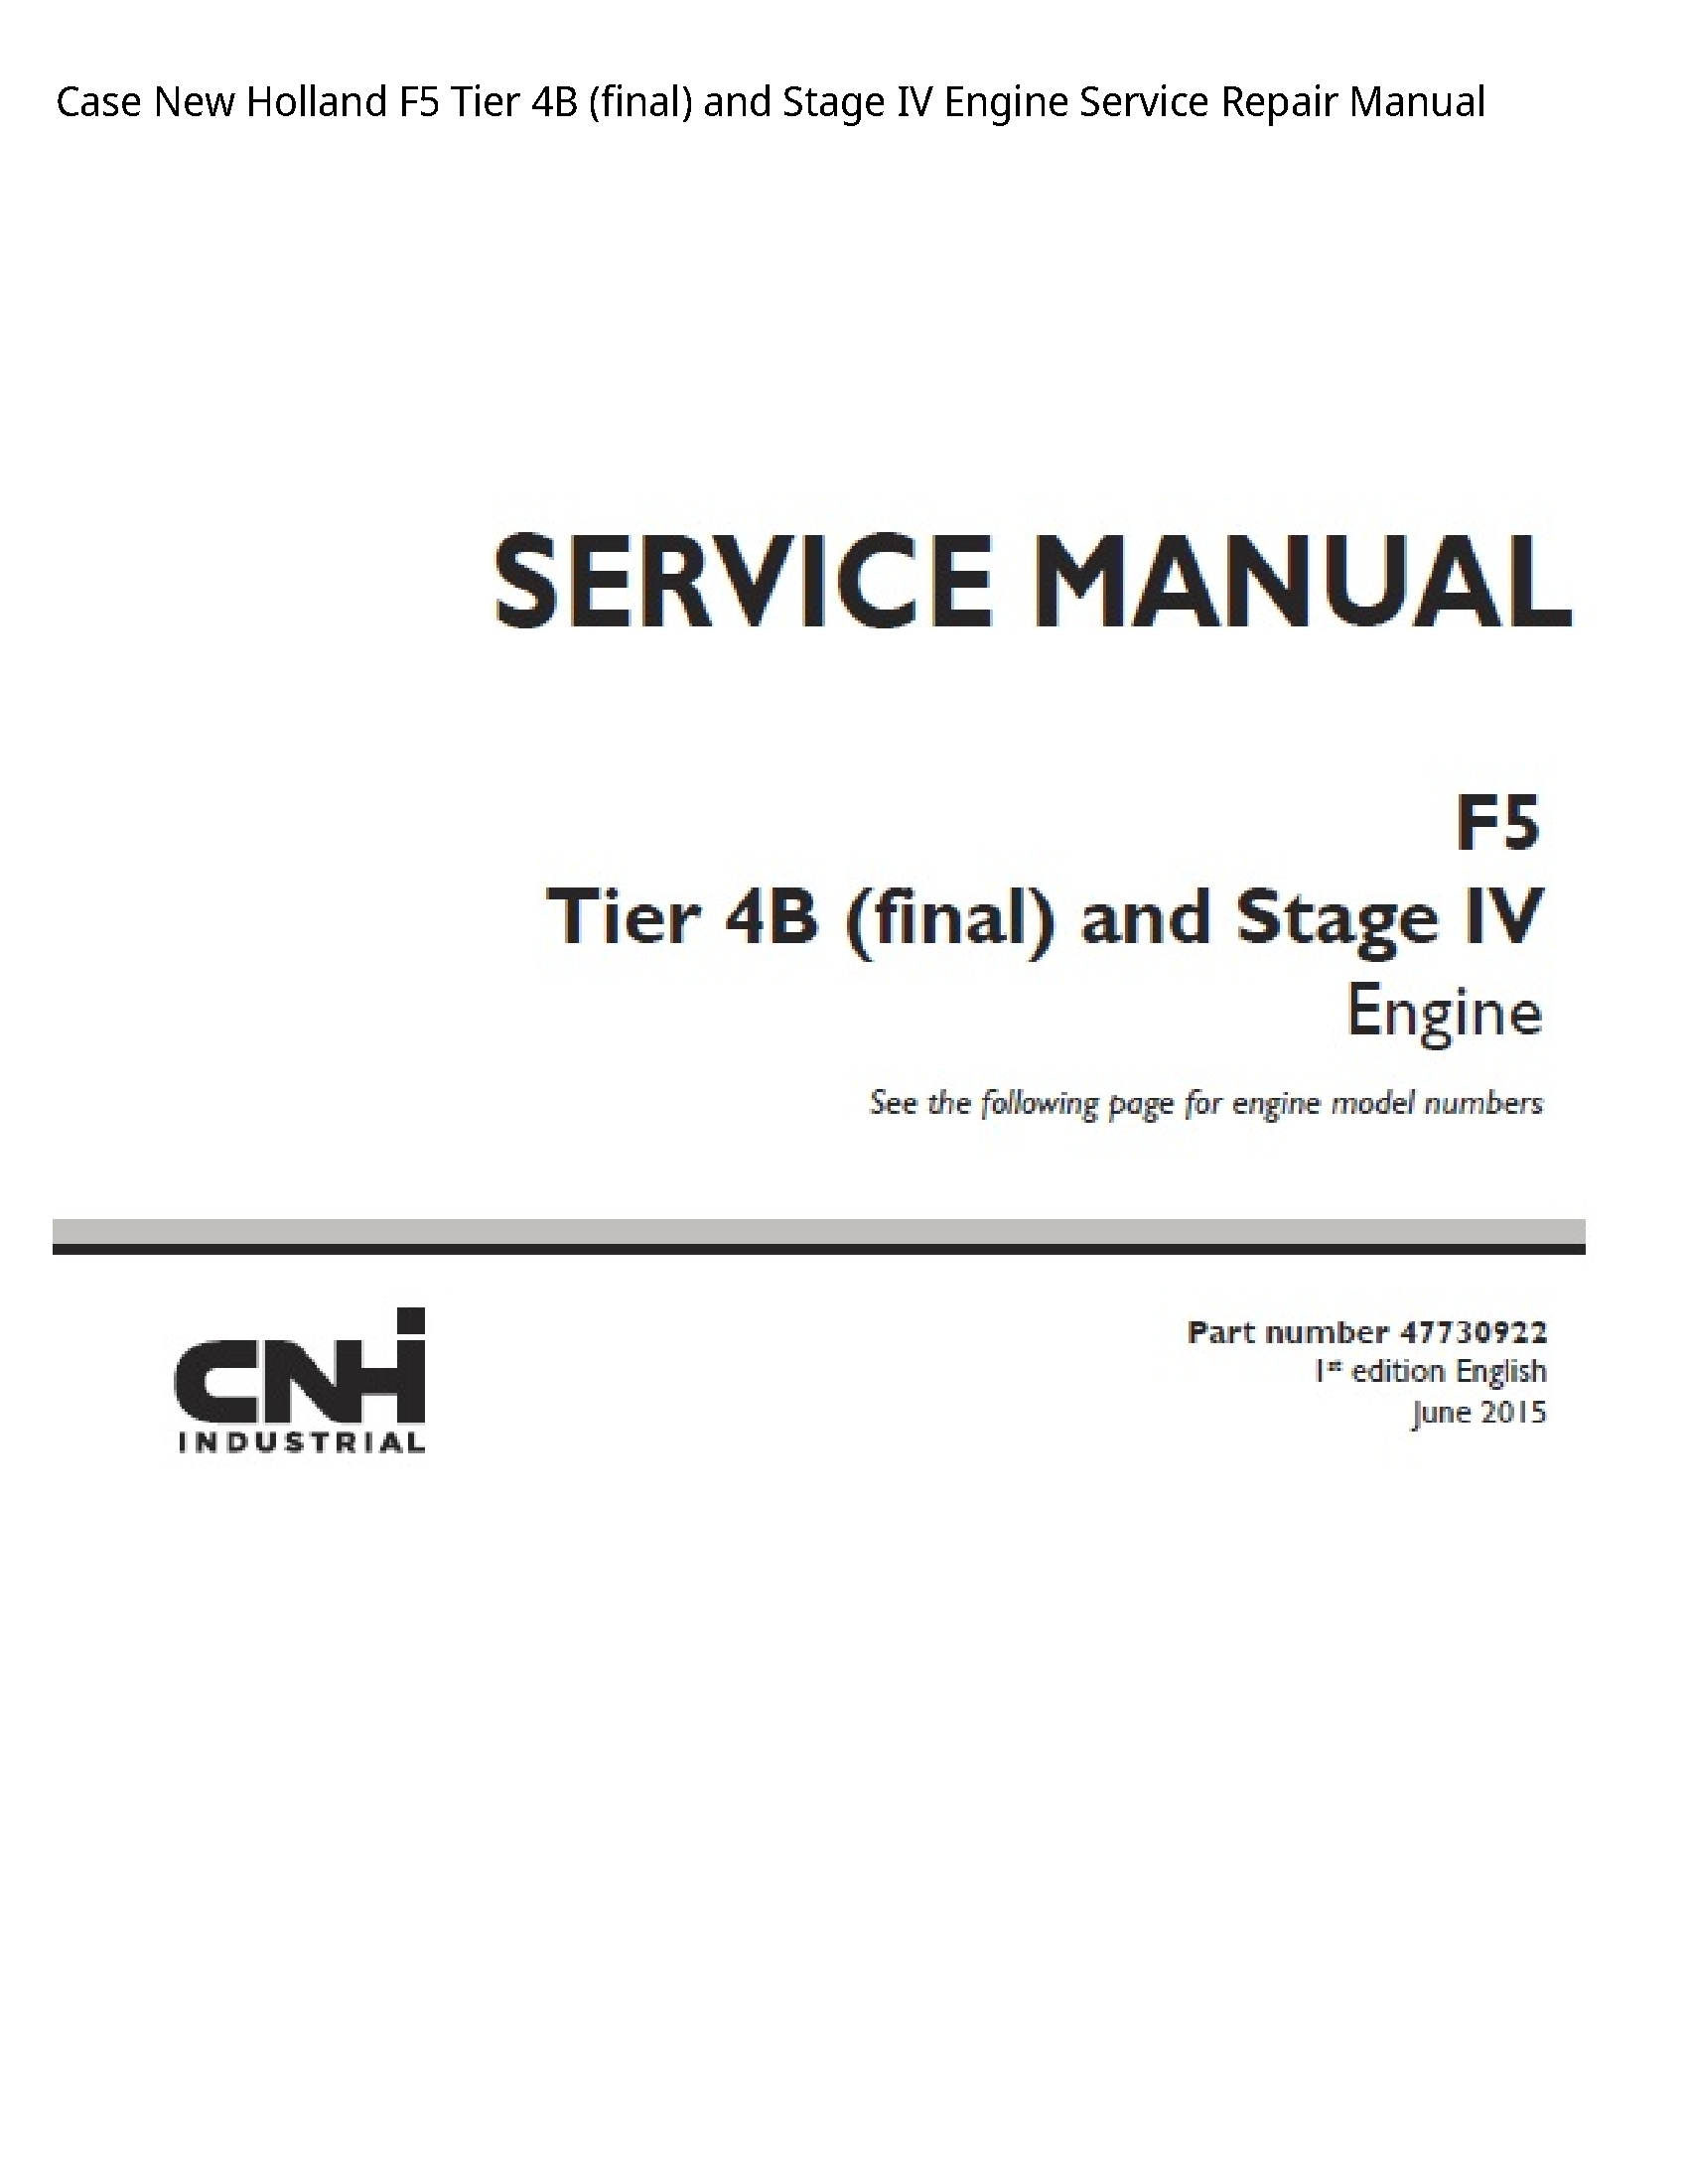 Case/Case IH F5 New Holland Tier (final)  Stage IV Engine manual